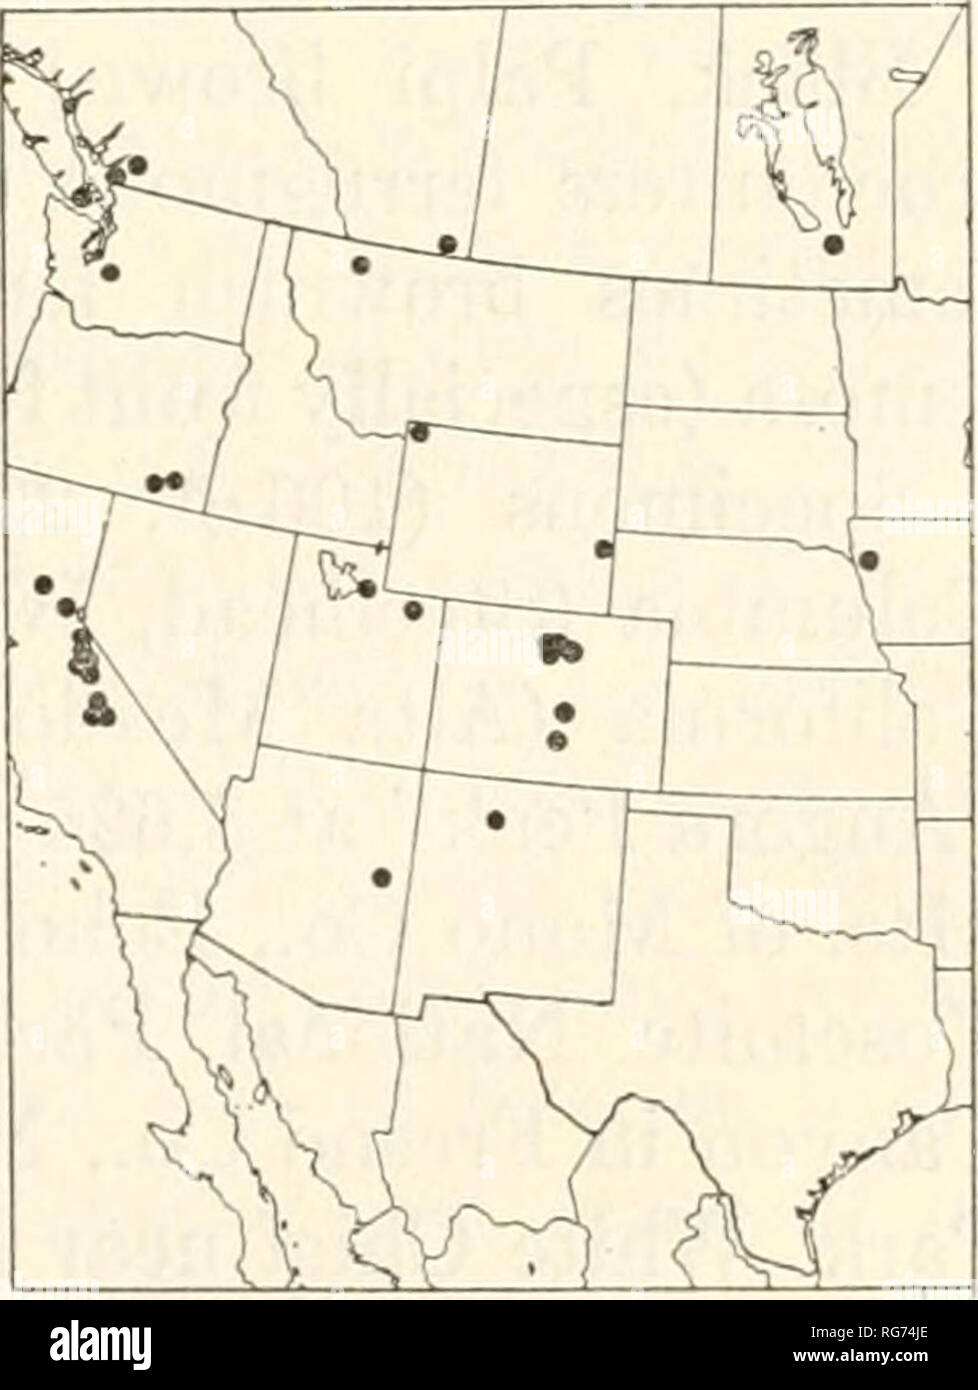 . Bulletin - United States National Museum. Science. ICHNEUMON-FLIES OF AMERICA: 1. METOPIINAE 111 and Summit Camp in Lassen Co.); Colorado (Mudd}r Pass and Phan- tom Valley in Rocky Mountain National Park at 9,400 ft.); Idaho (&quot;Cornwall,&quot; &quot;Houser Lake,&quot; Moscow Mt., and Worley); Manitoba (Cedar Lake); Michigan (Charlevoix Co., Clinton Co., Grand Tra- verse Co., Gratiot Co., Kalkaska Co., Leelanau Co., Mecosta Co., Midland Co., Montcalm Co., Osceola Co., and Wexford Co.); New Hampshire (Bretton Woods, carriage road on Mount Washington, &quot;Glen House,&quot; Jaffrey, and Ra Stock Photo